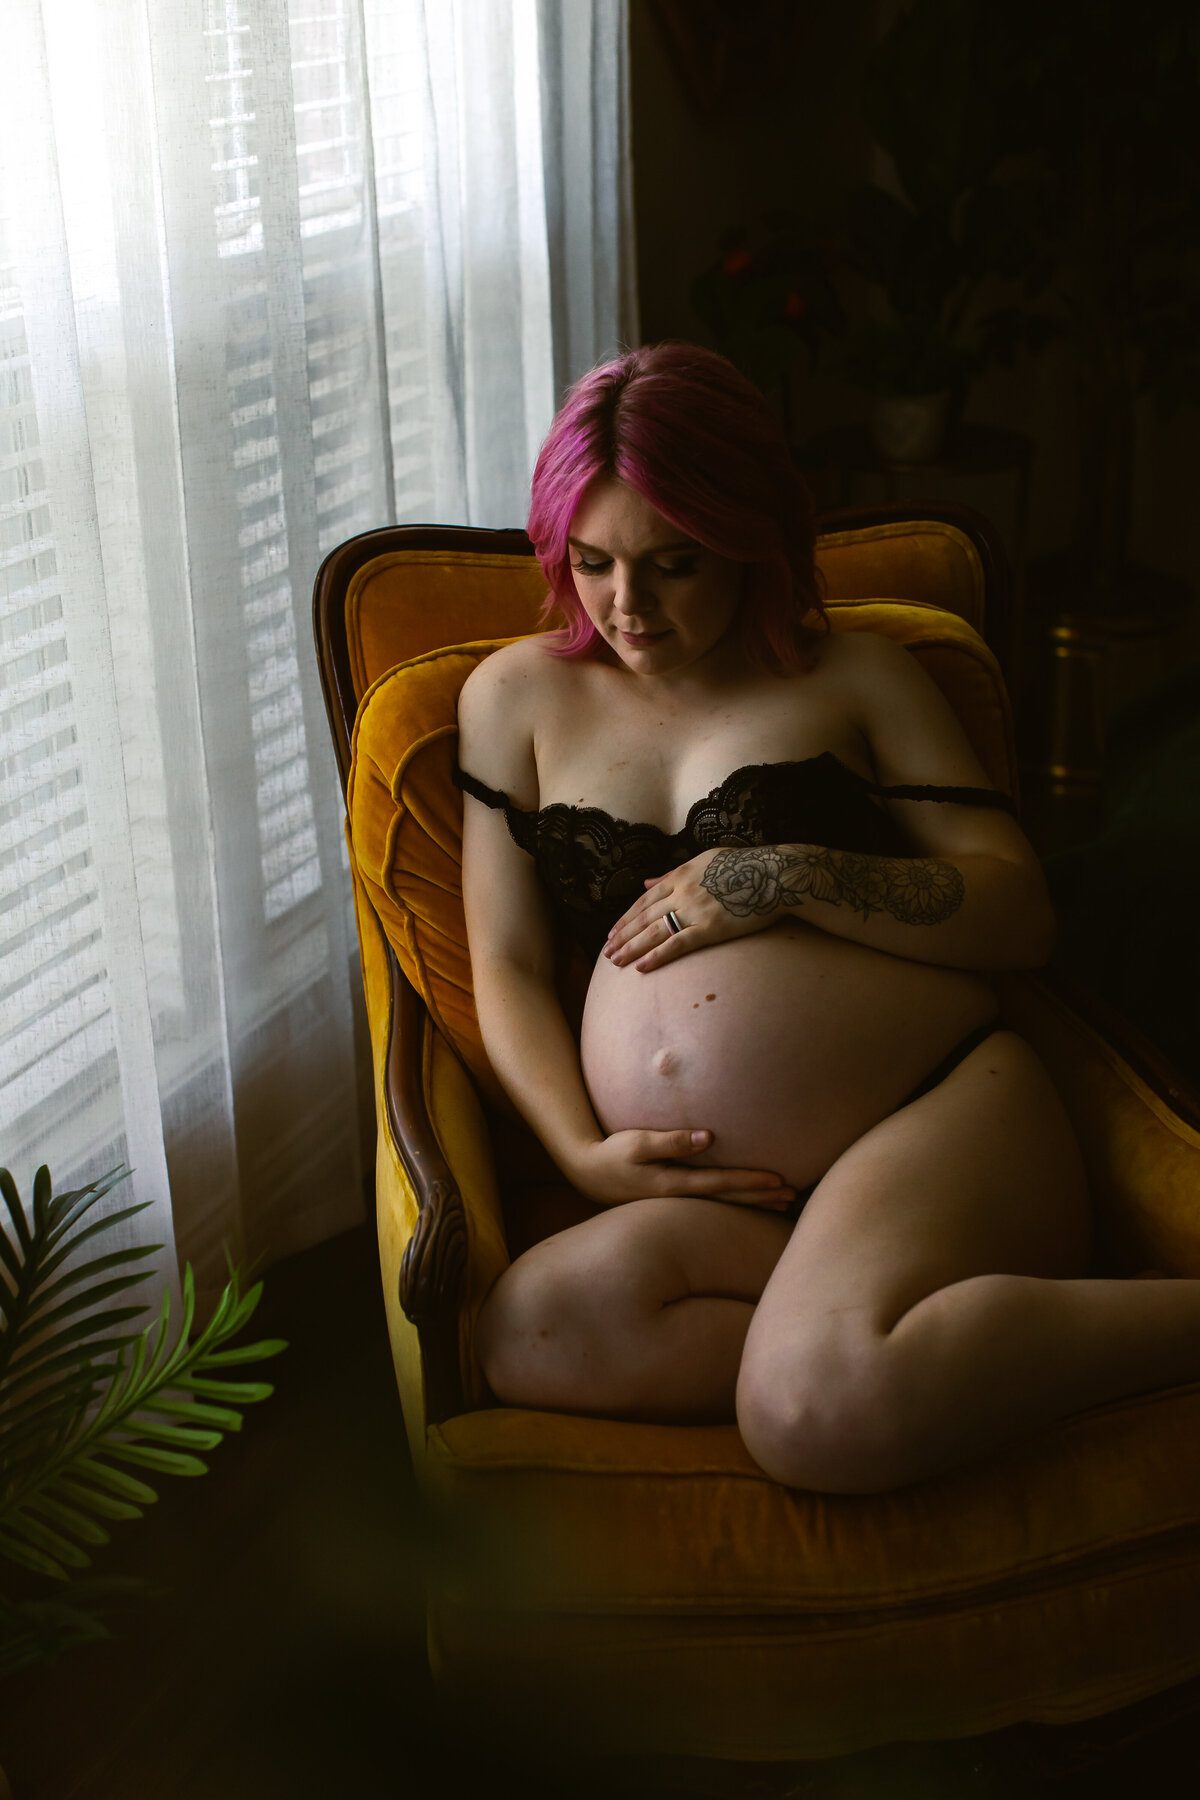 In a sunlit studio, a glowing pregnant woman poses for a maternity boudoir session, showcasing her baby bump